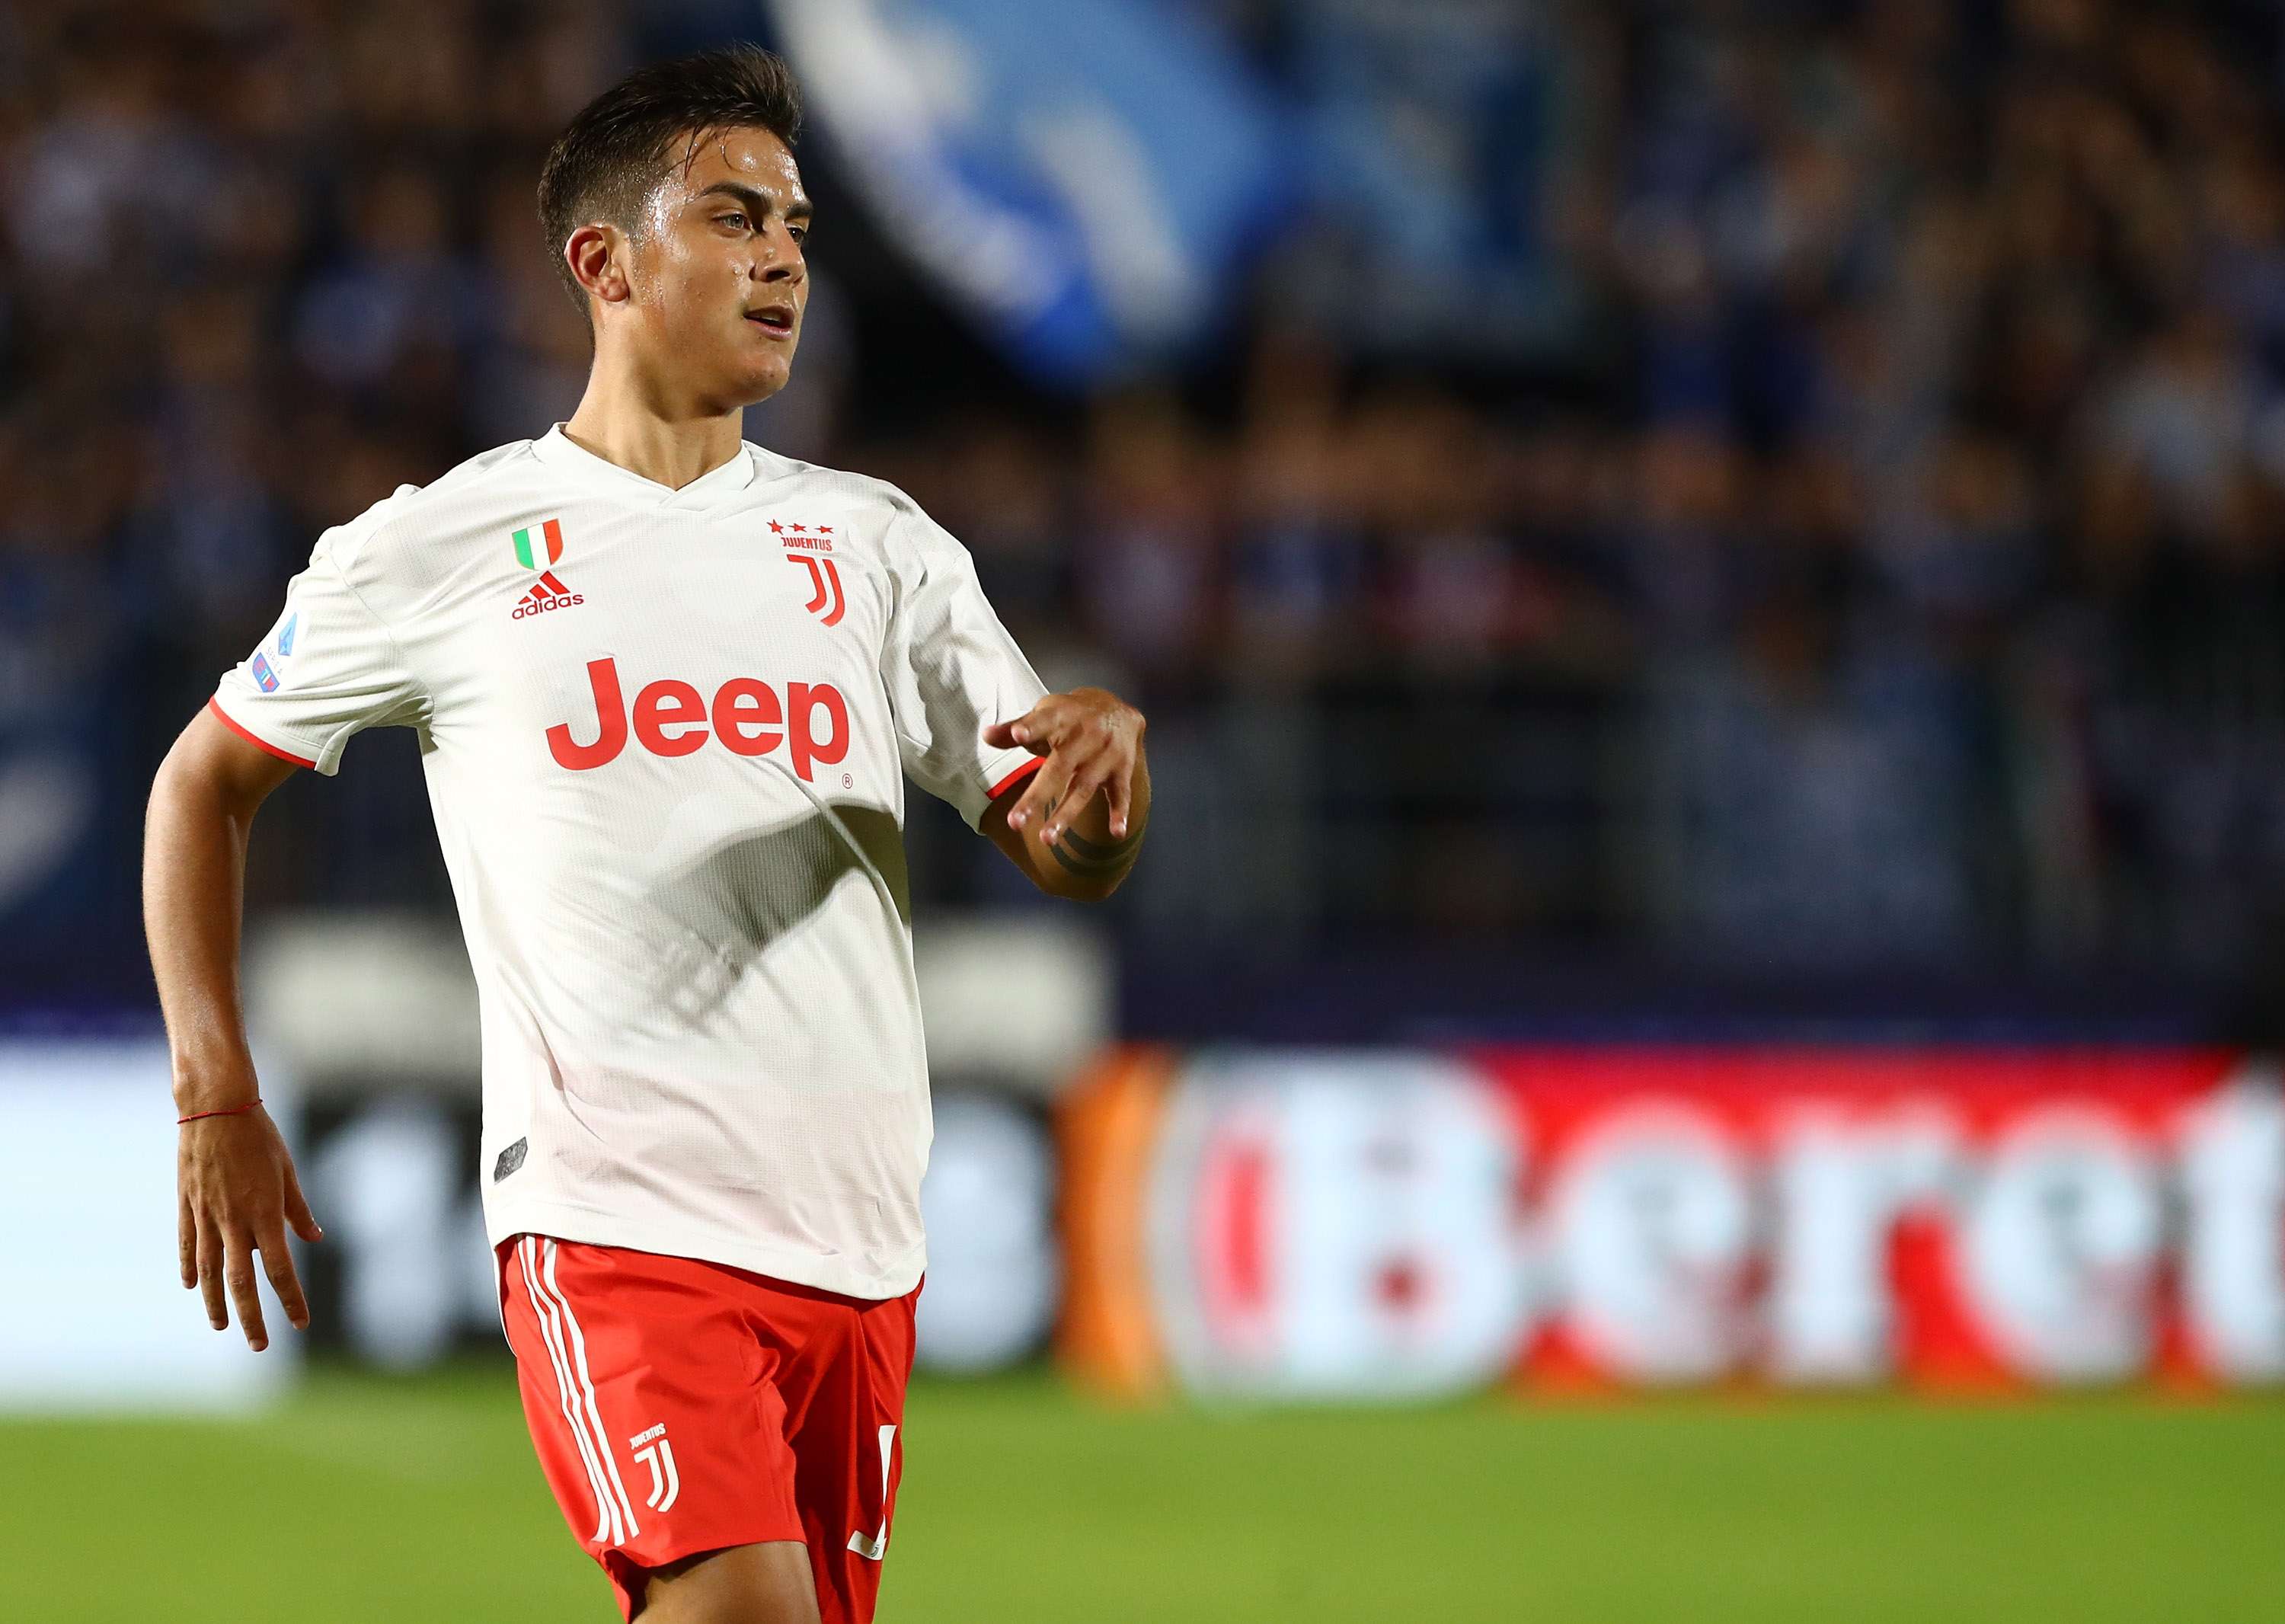 Paulo Dybala is ready to move on from Juventus (Photo by Marco Luzzani/Getty Images)